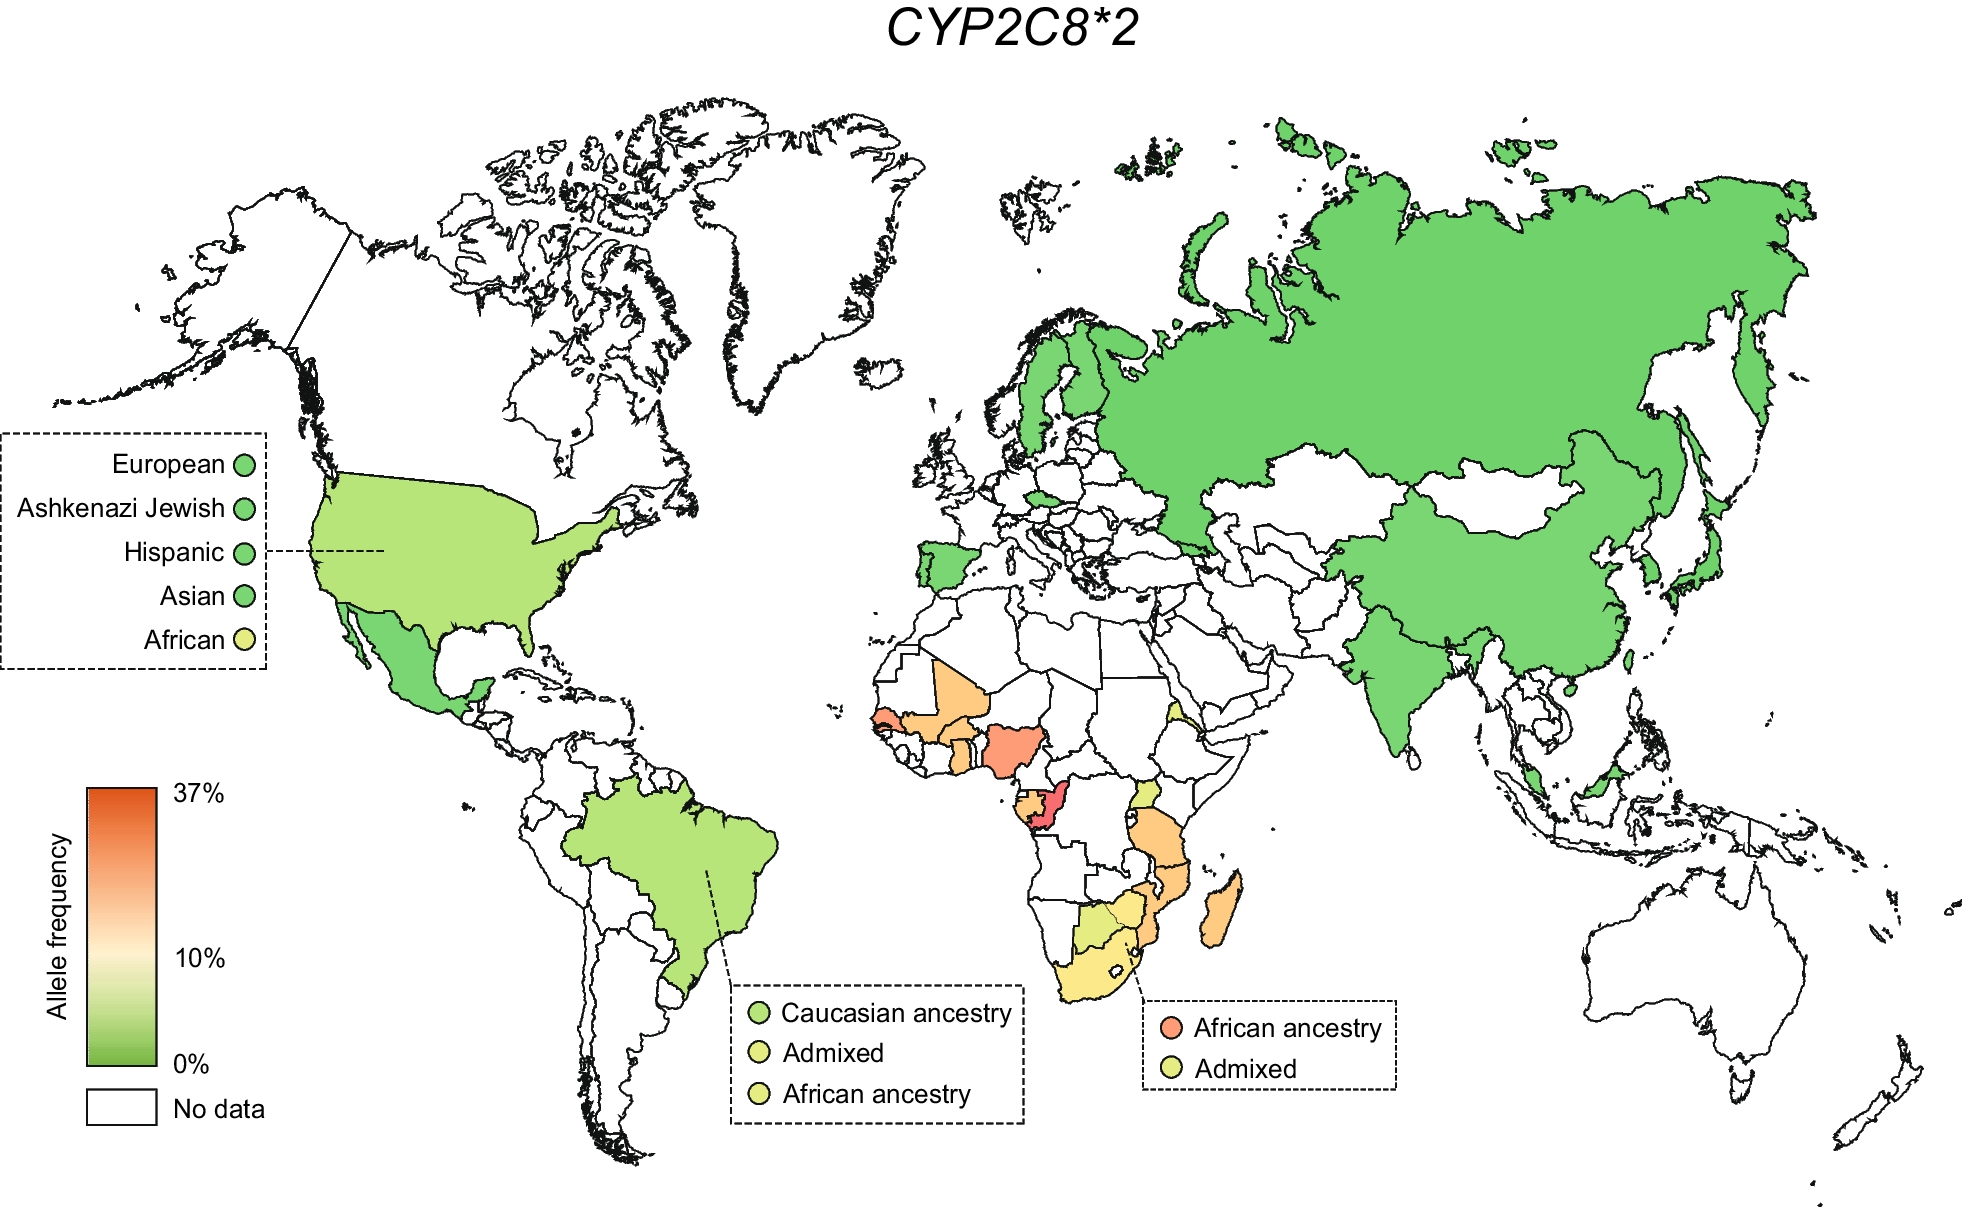 Meta-analysis of the global distribution of clinically relevant CYP2C8 alleles and their inferred functional consequences